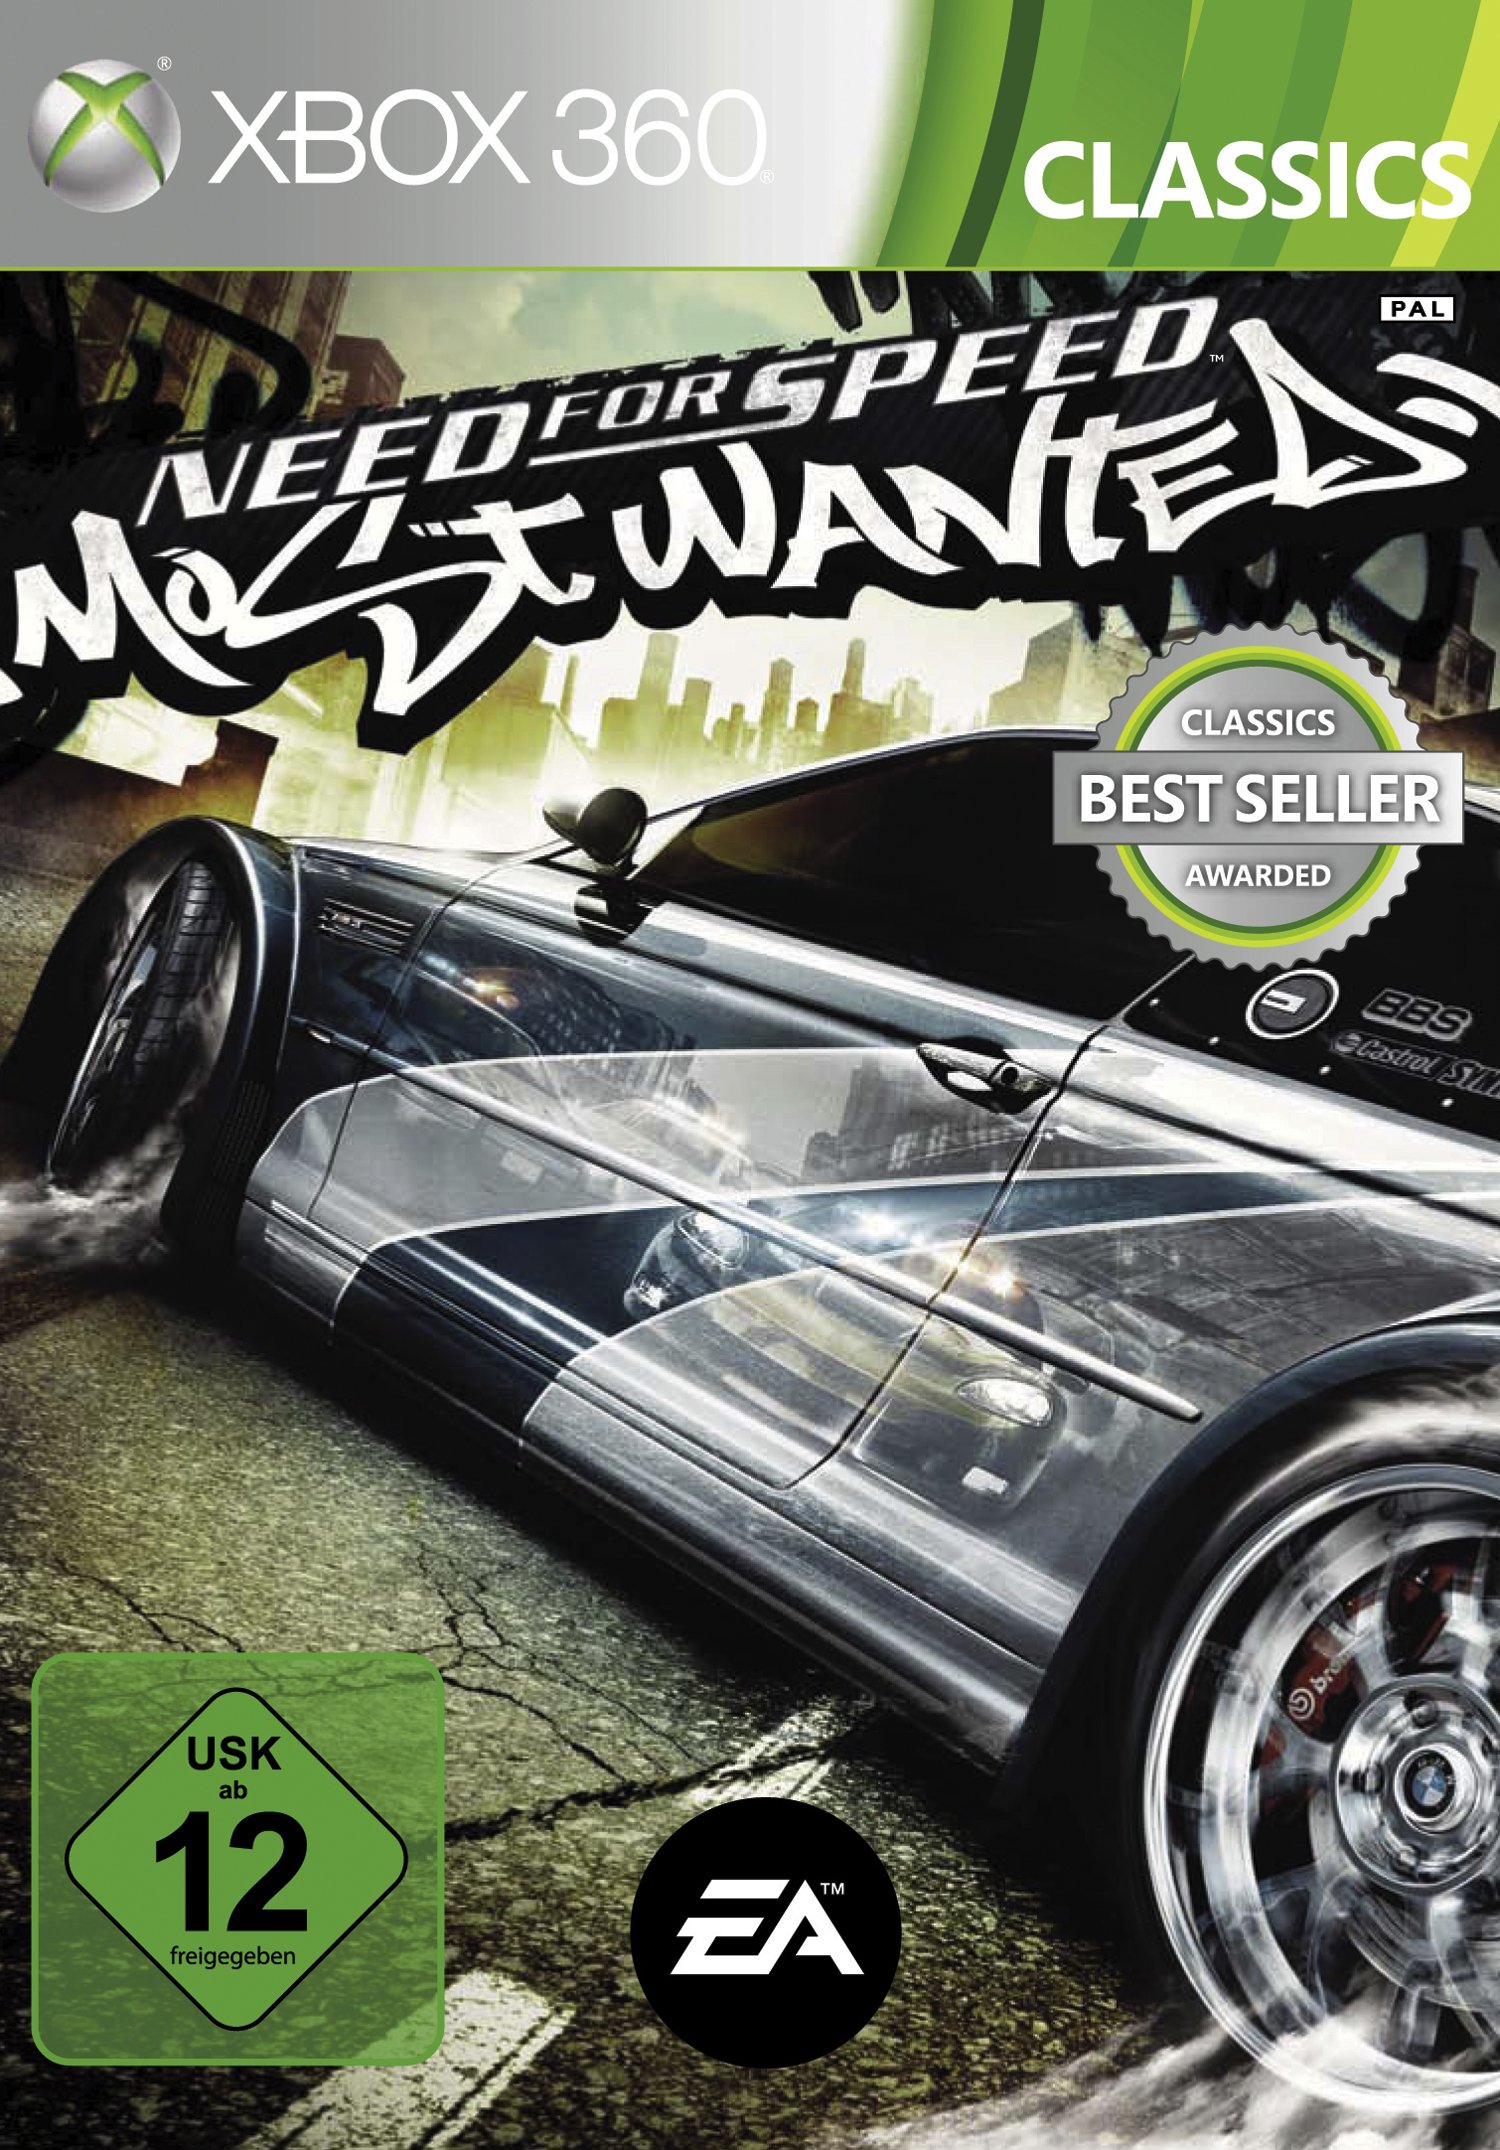 Nfs most wanted xbox. Need for Speed most wanted Xbox 360 диск. NFS most wanted 2005 Xbox 360. NFS most wanted 2005 диск. Most wanted Xbox 360 оригинал 2005.